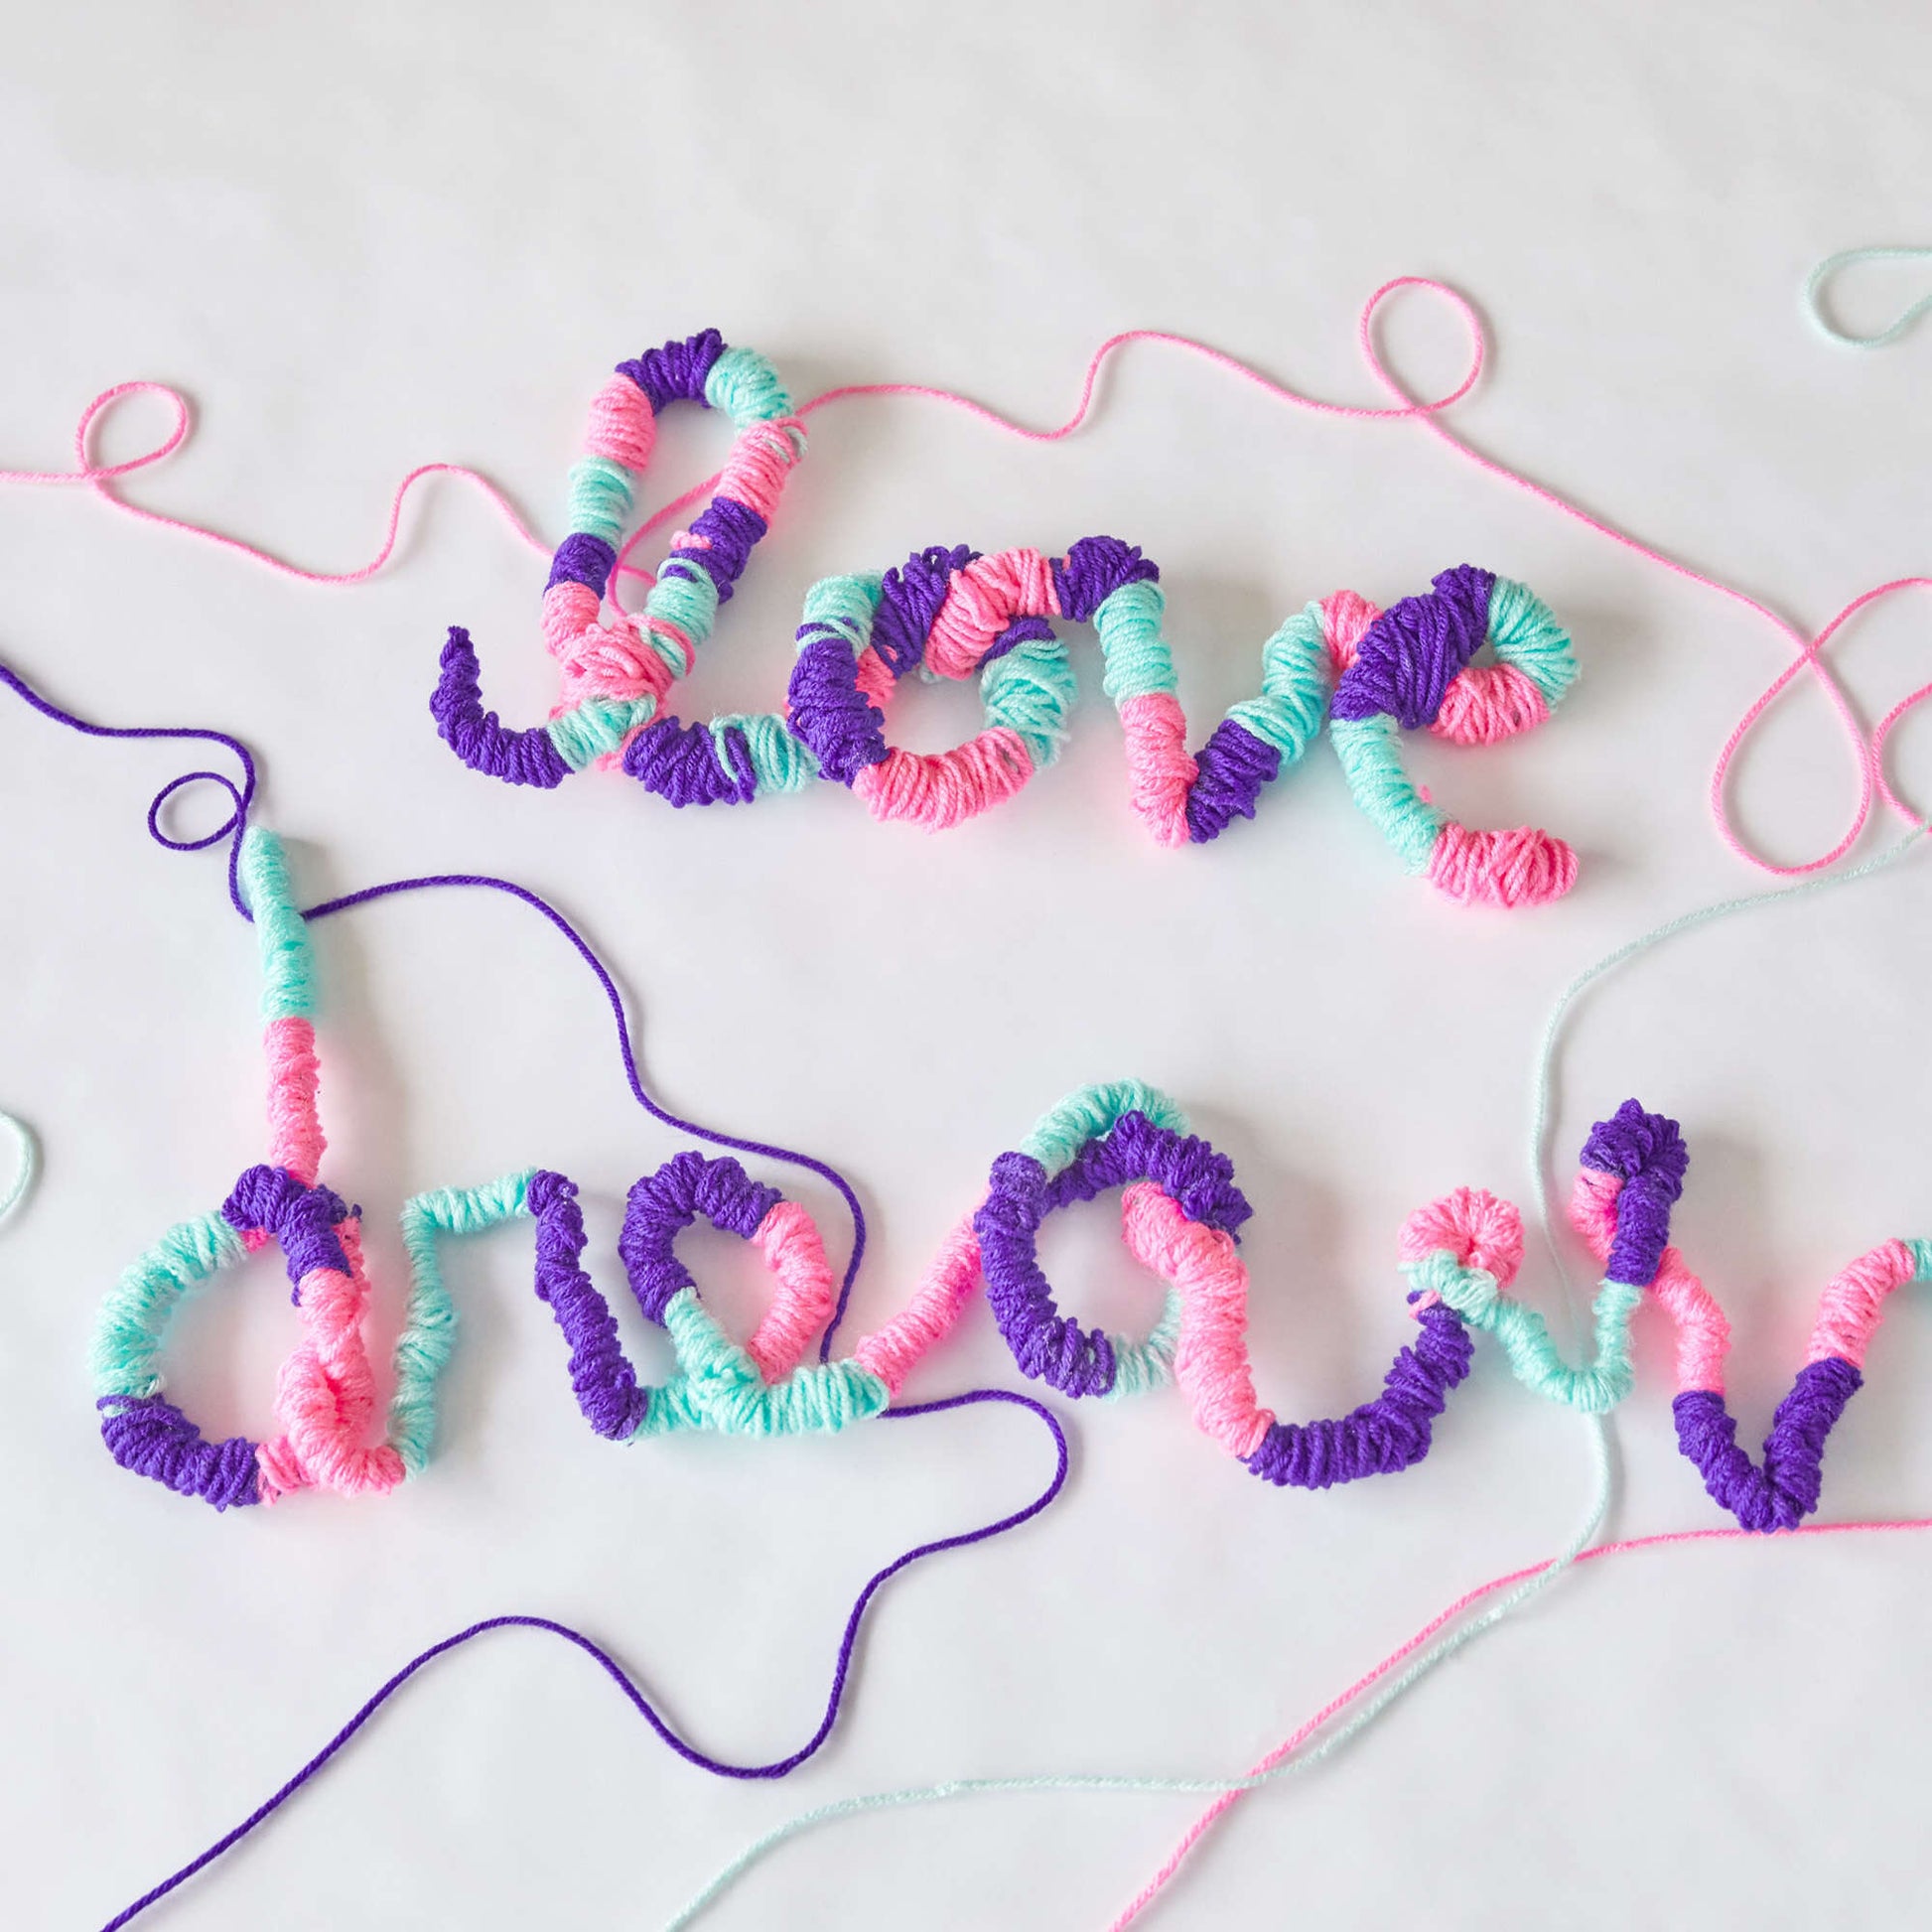 Free Red Heart Craft Yarn-Wrapped Wire Words Pattern